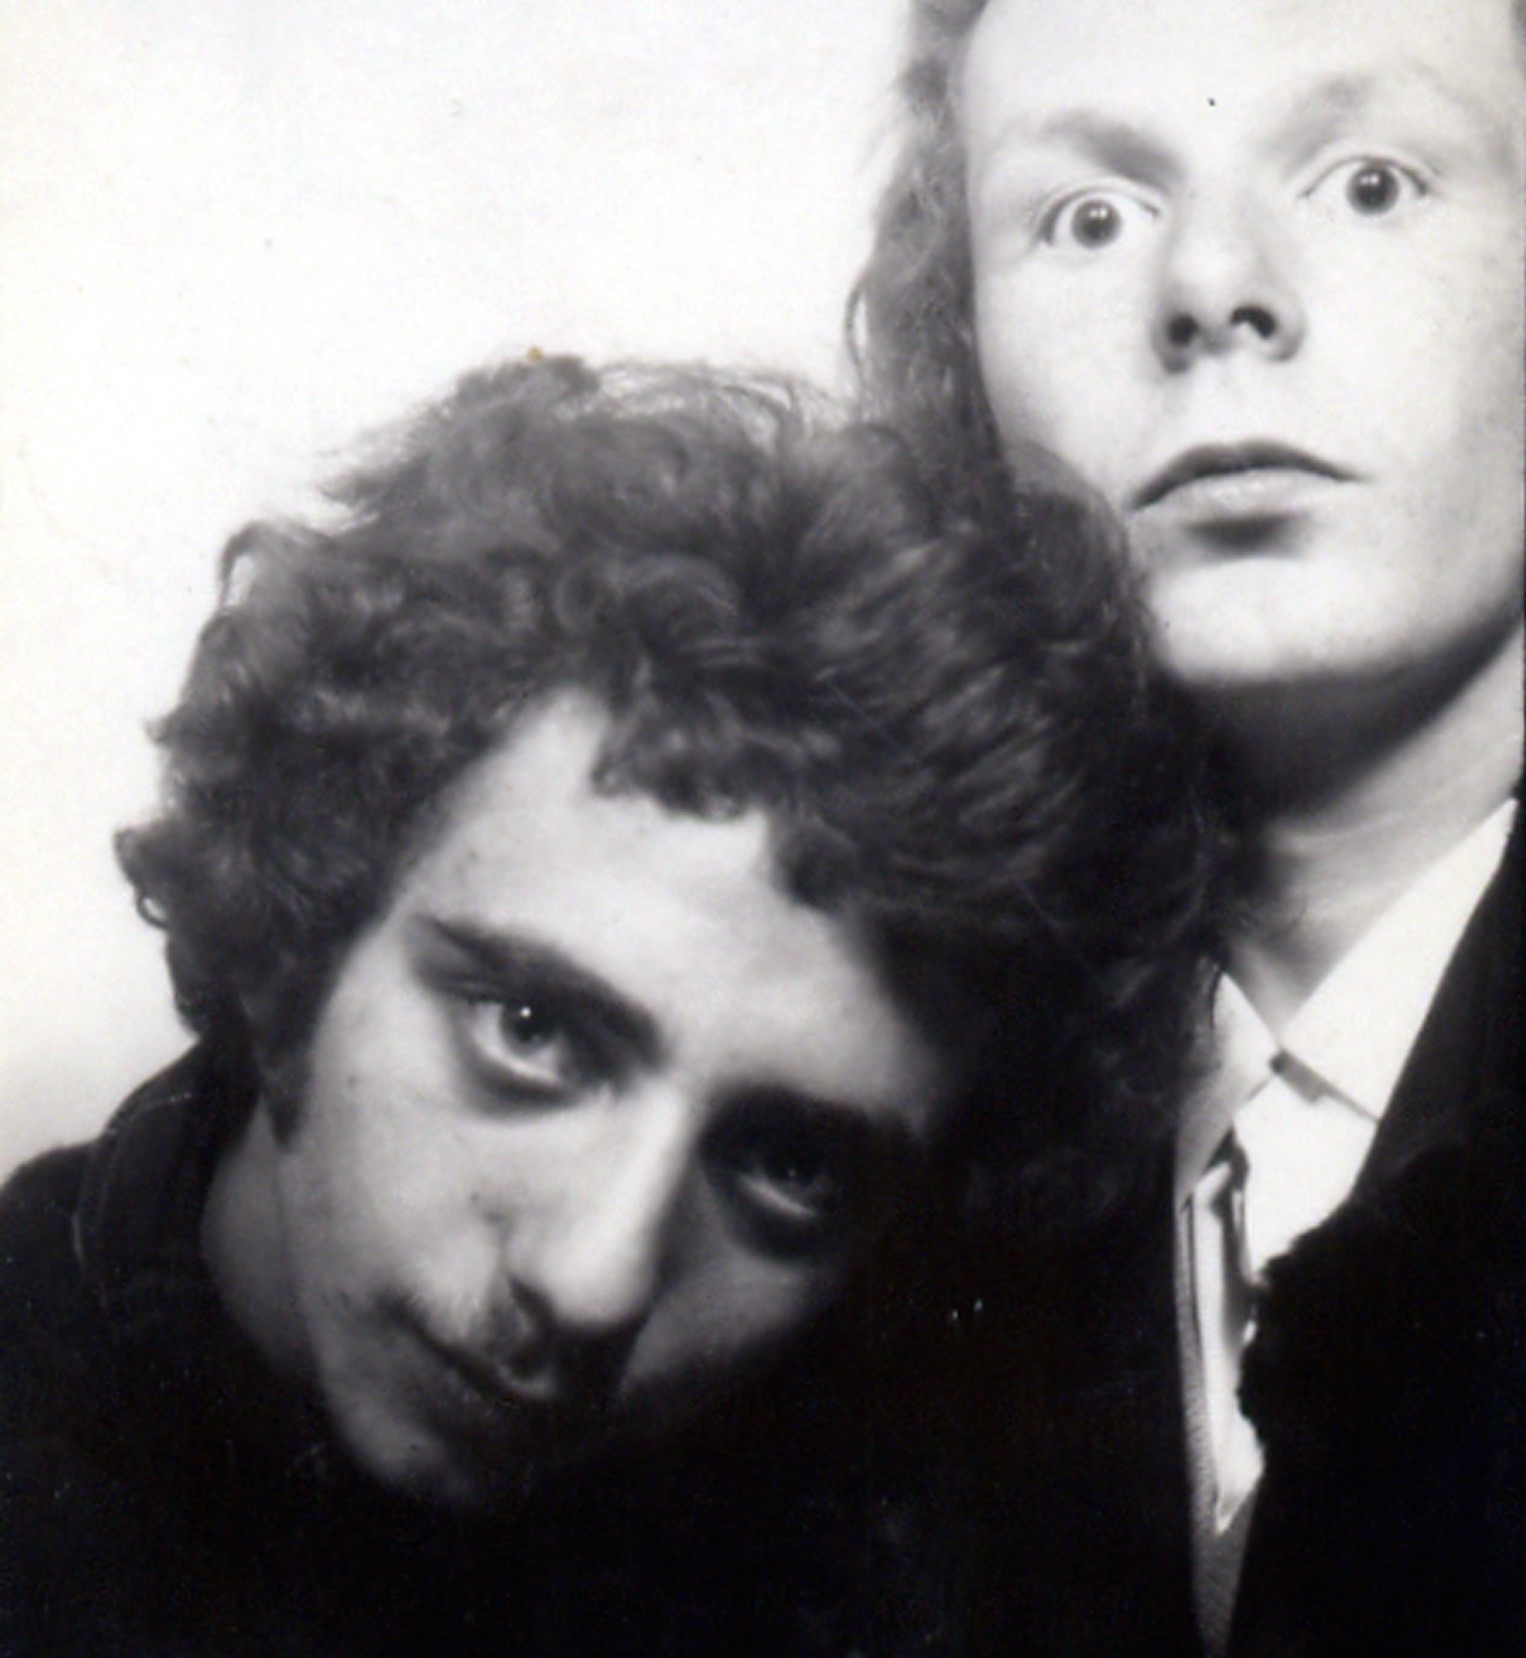 Peter May with his friend
                  Stephen in the 1960s